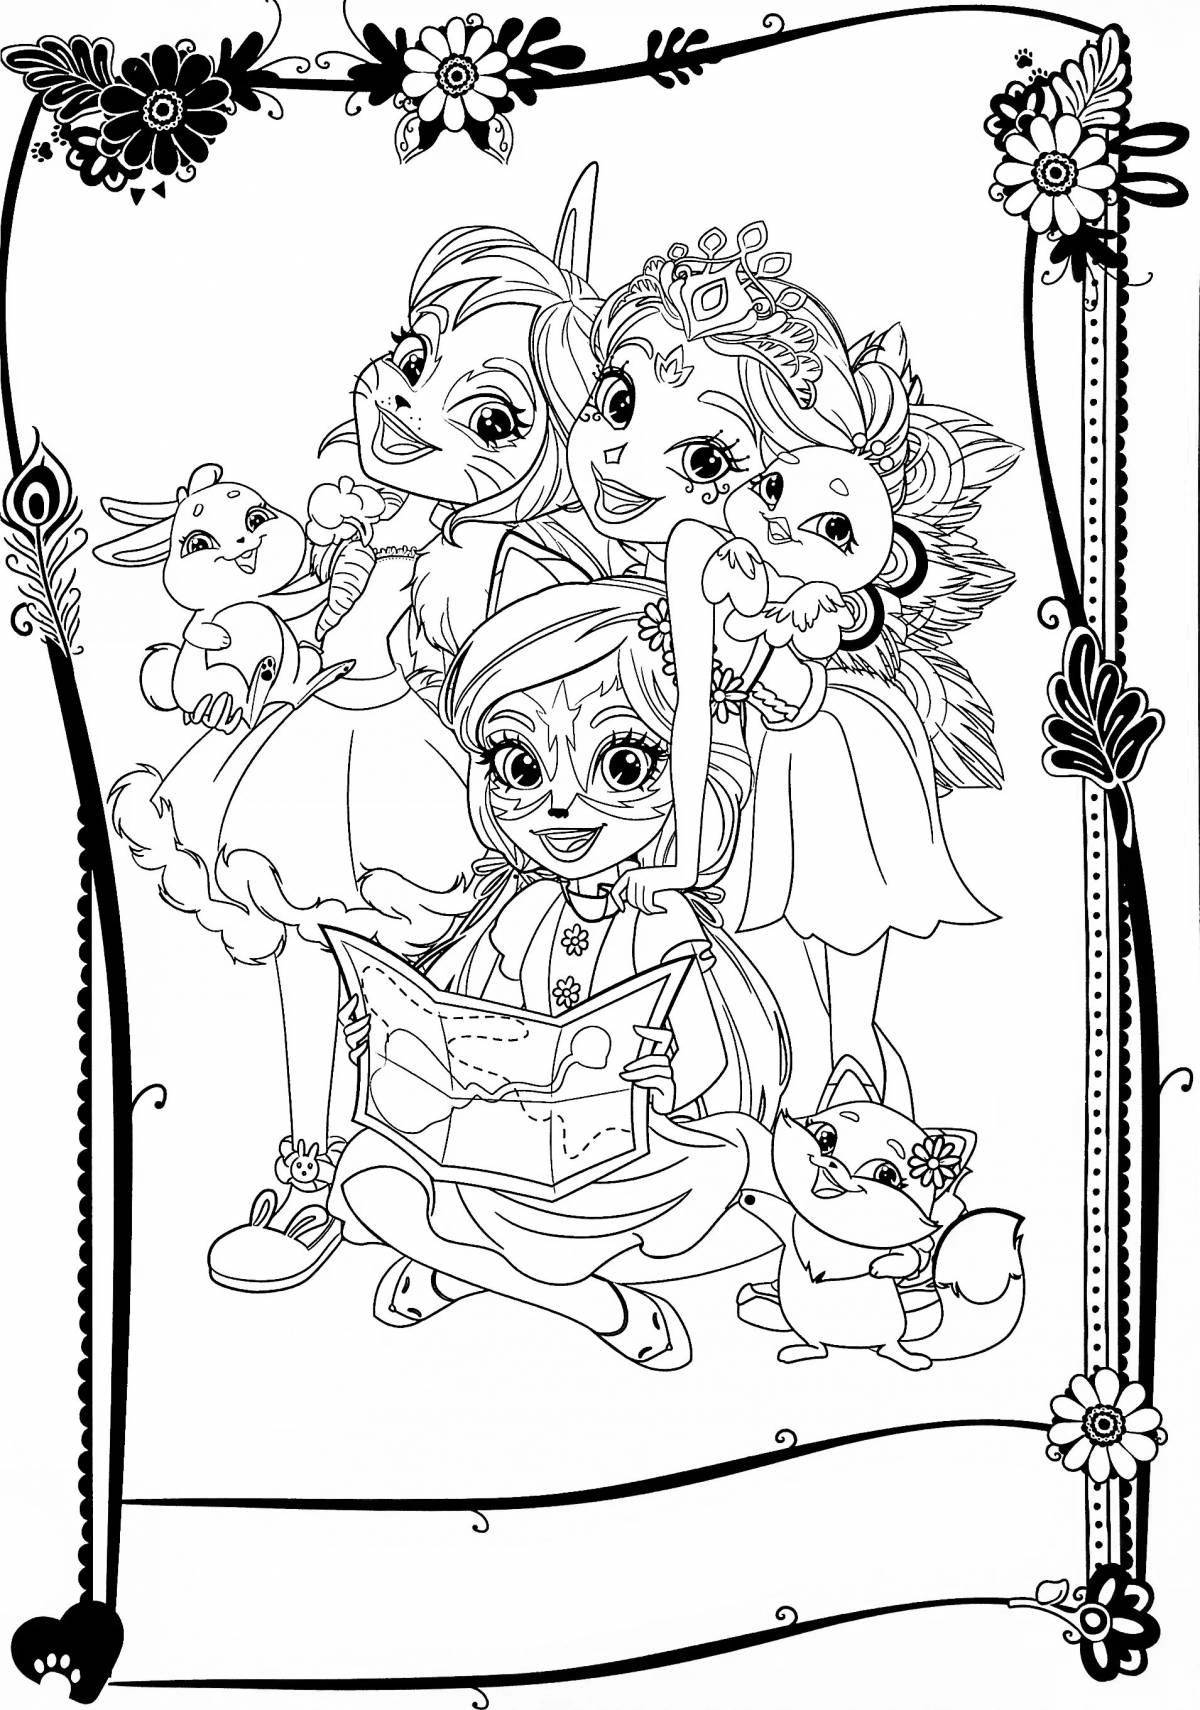 Exciting enchancimals coloring pages